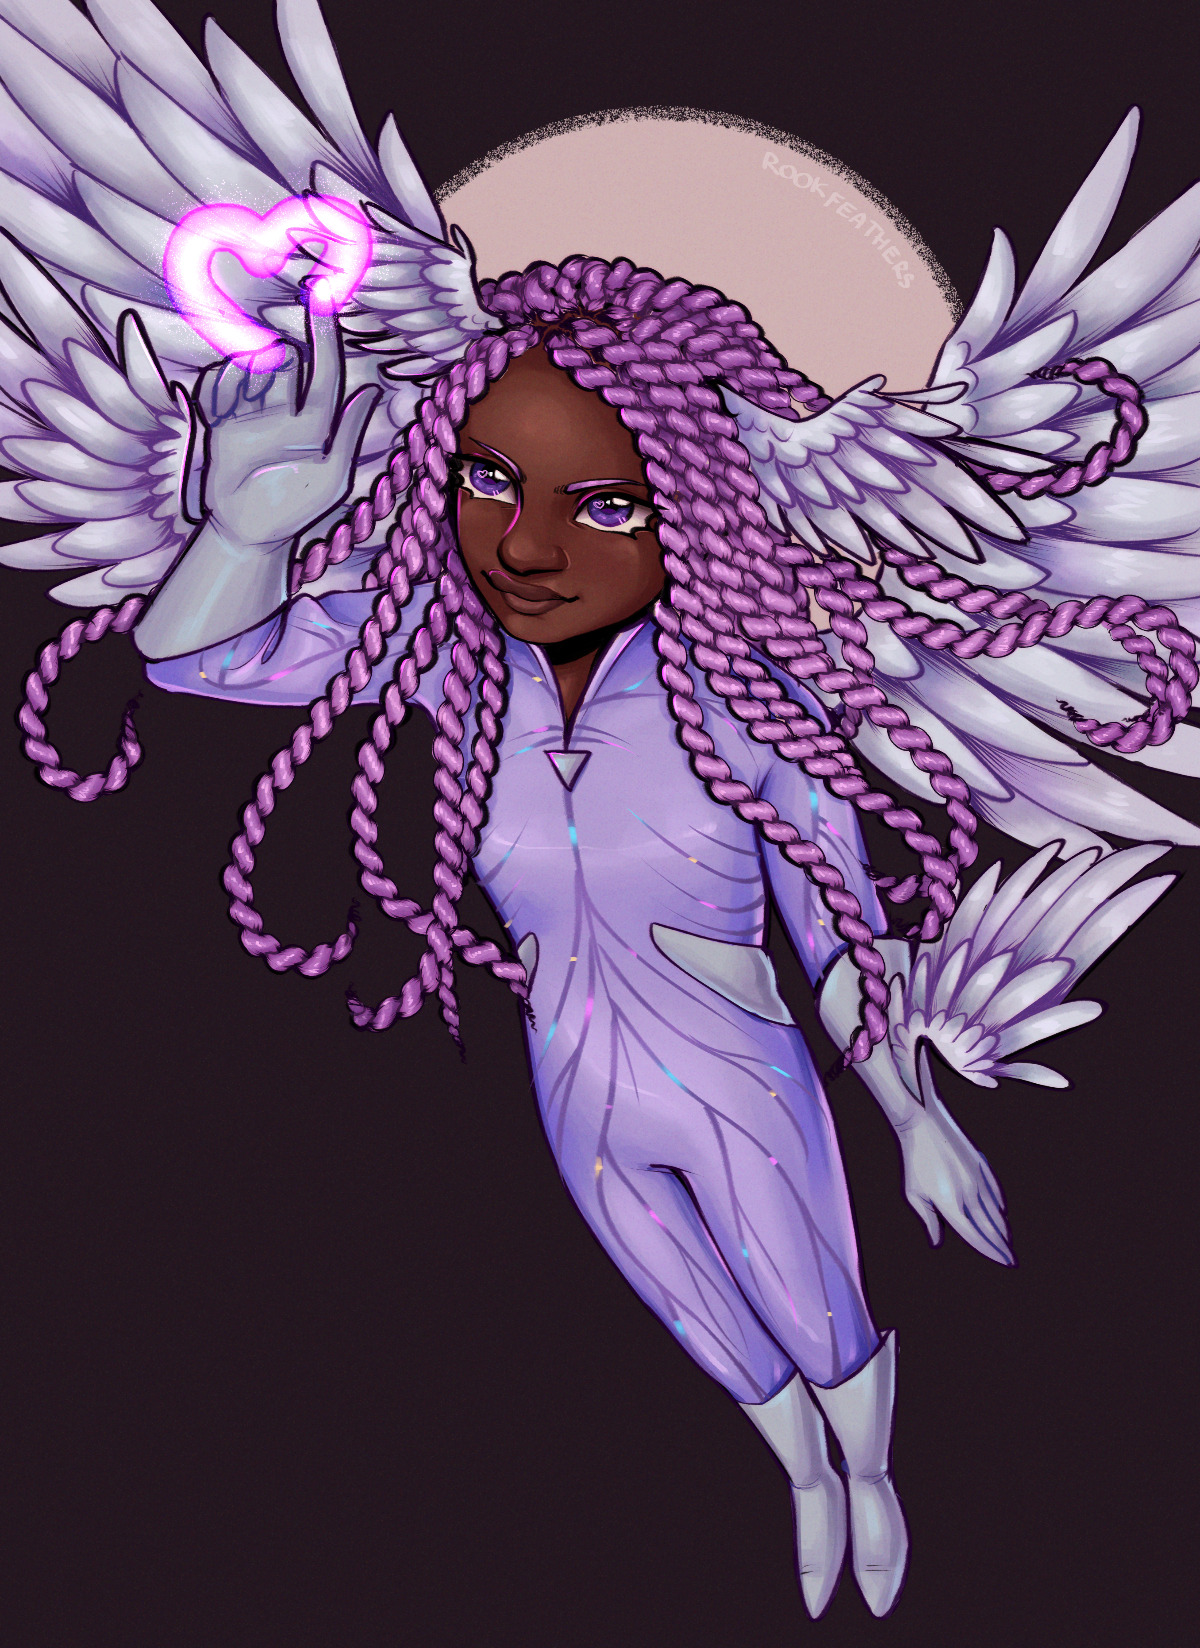 A dark-skinned young women with a purple flight suit and pink hair styled into twists.